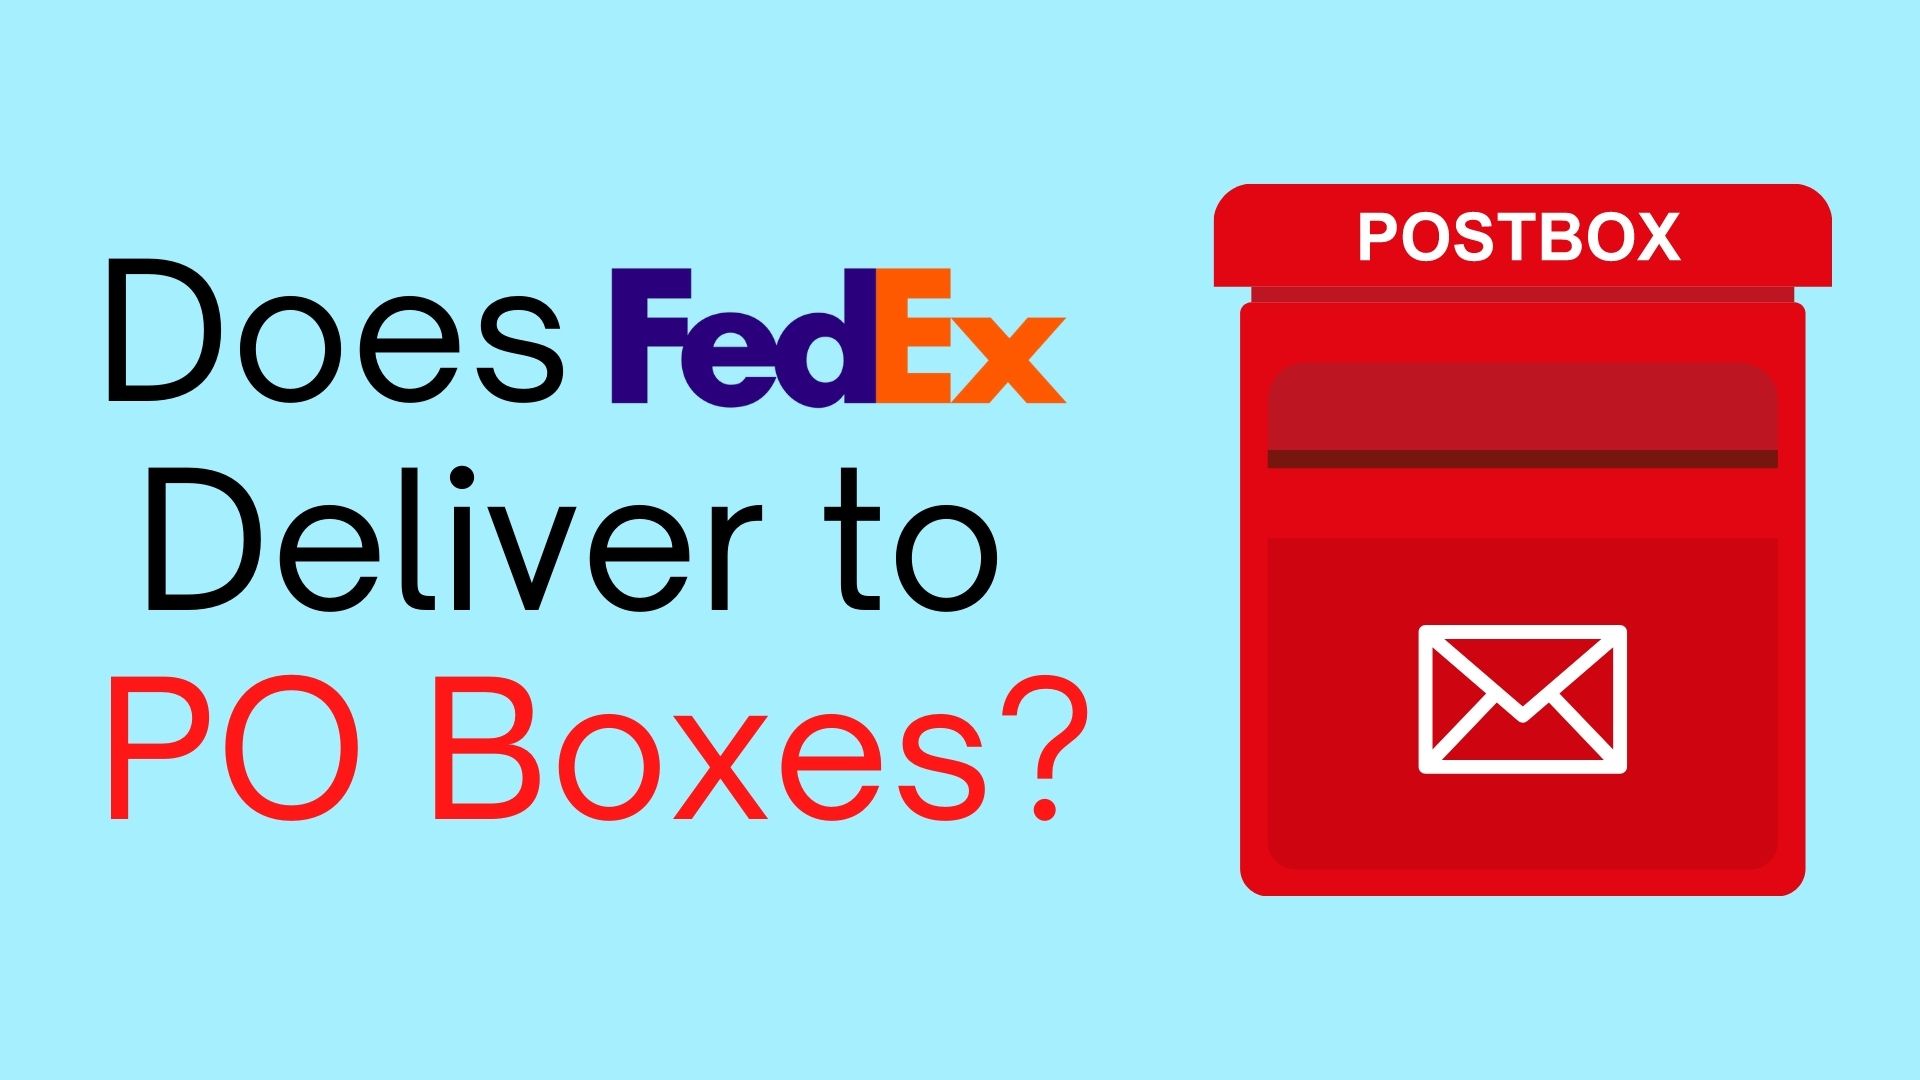 Does FedEx deliver to PO Boxes